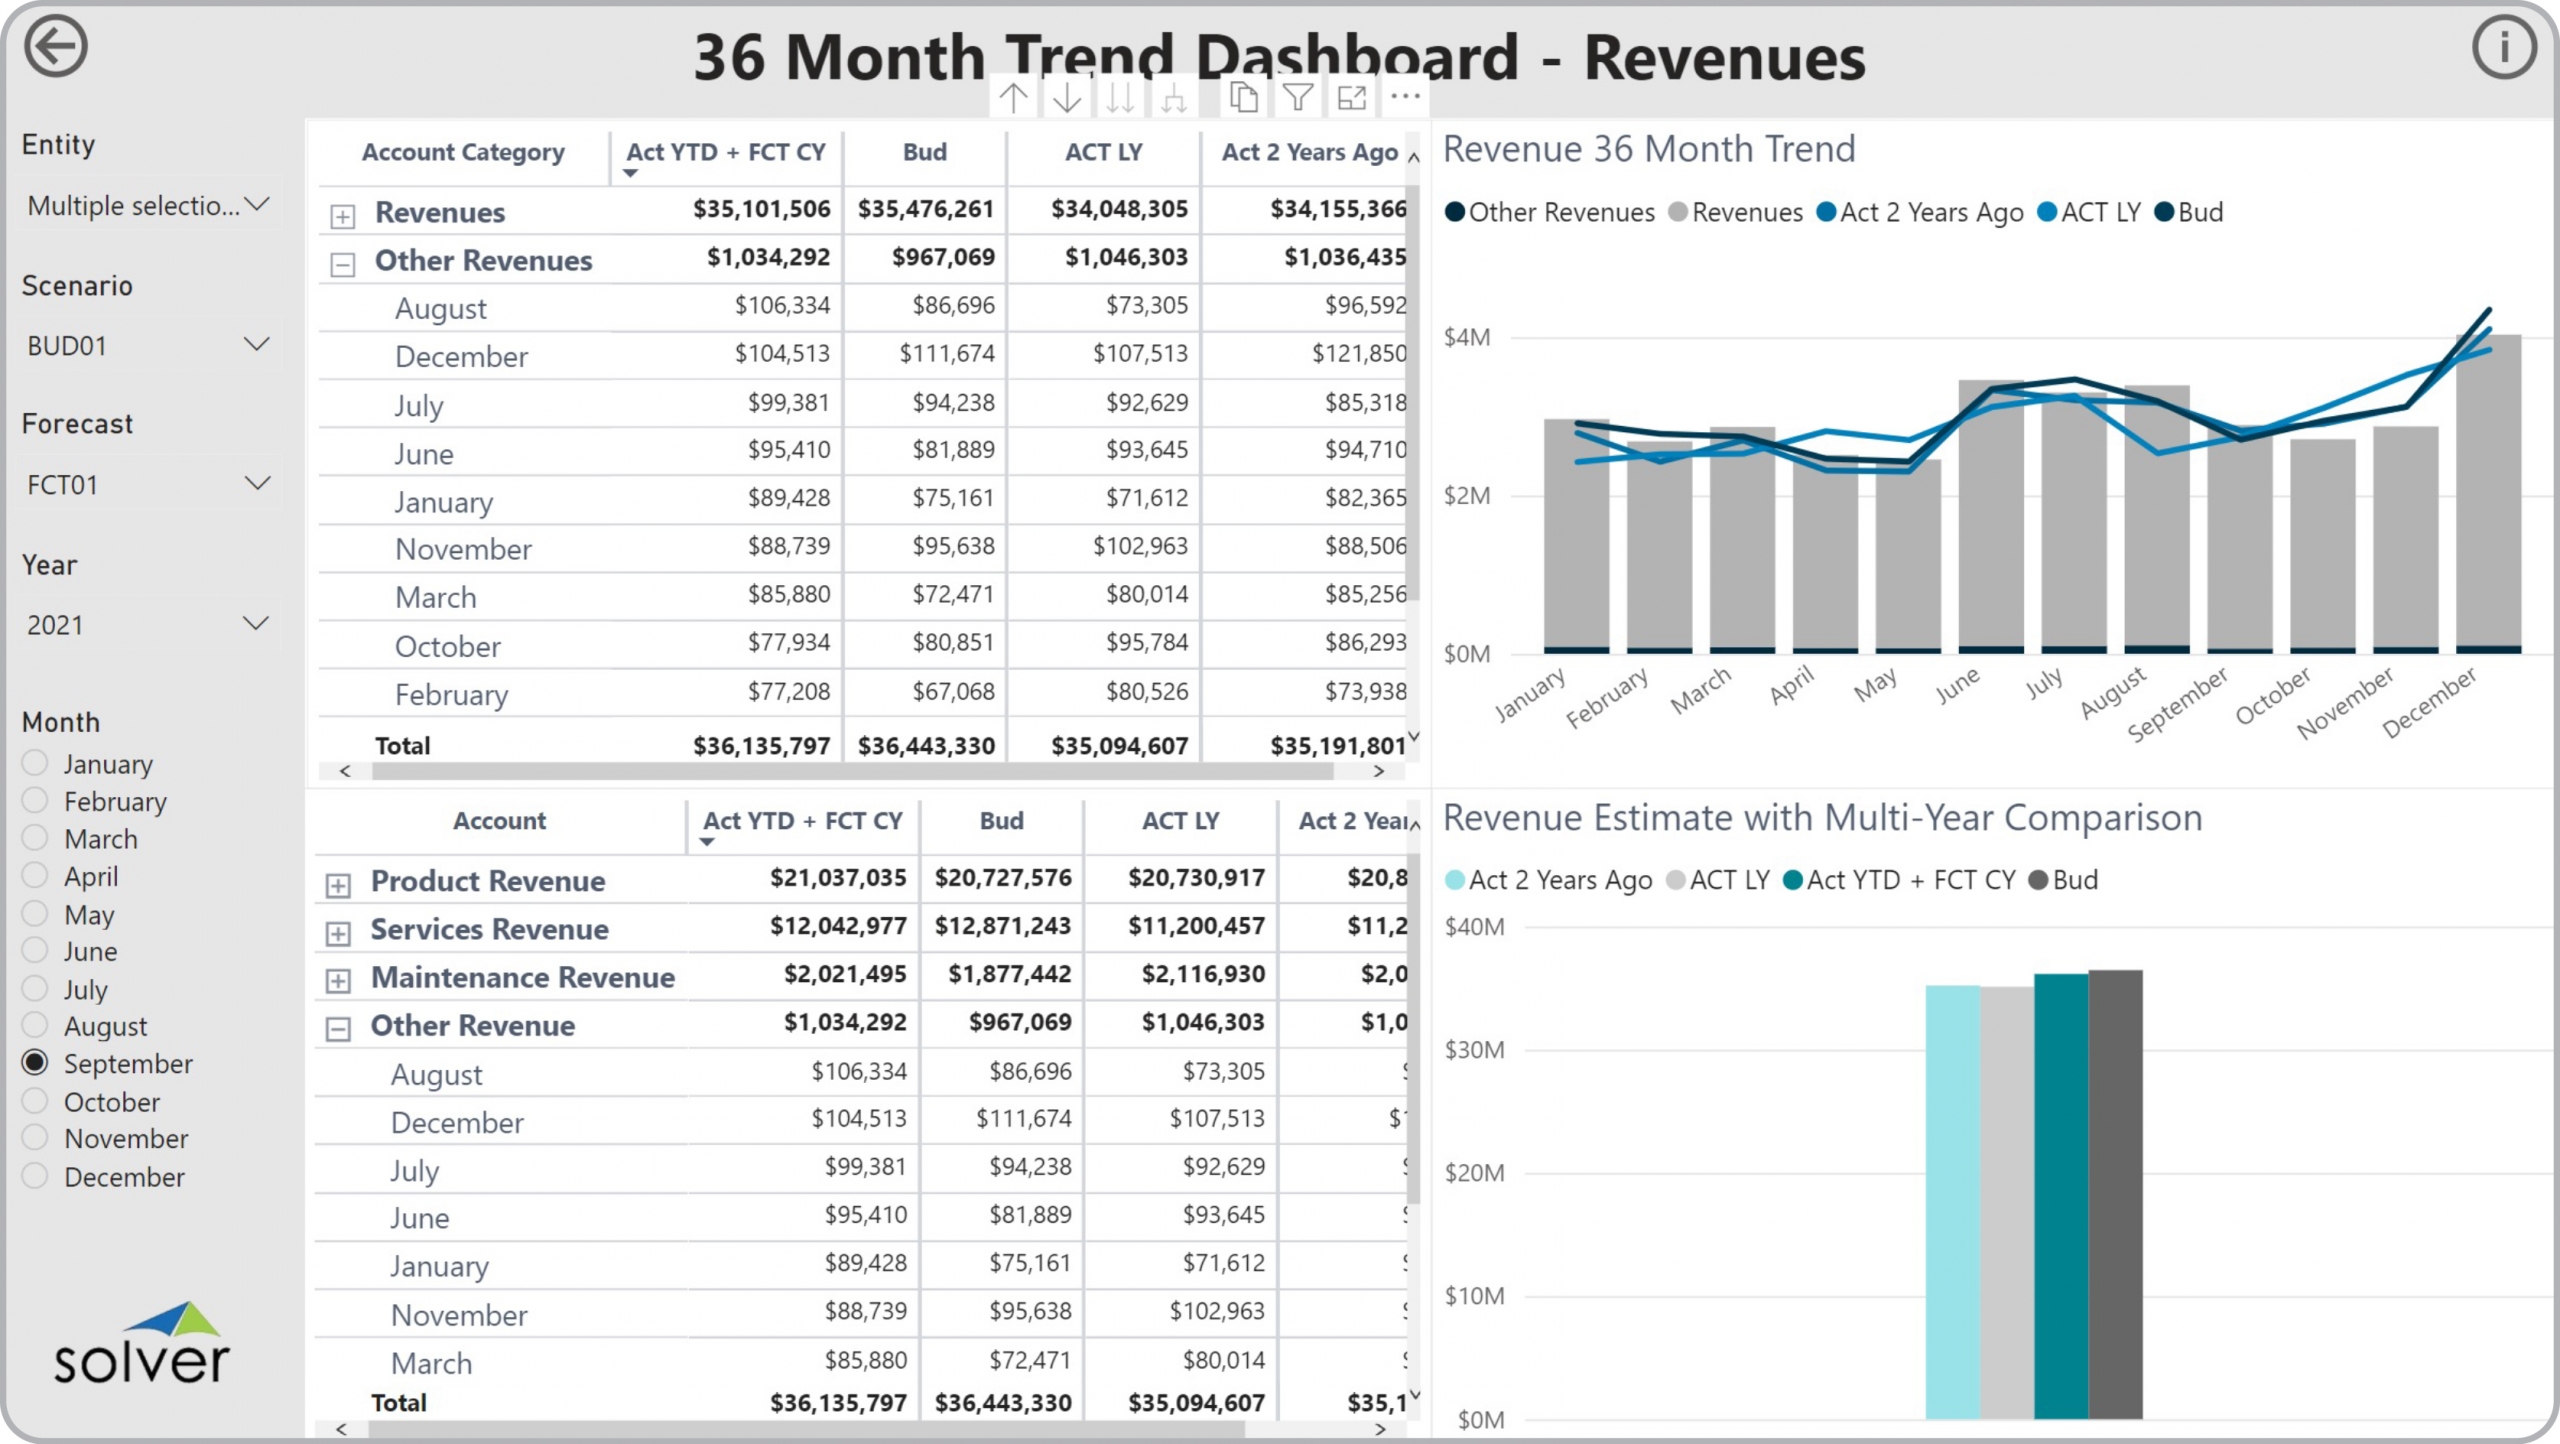 Example of a 36 Month Revenue Trend Dashboard to Streamline the Monthly Reporting Process